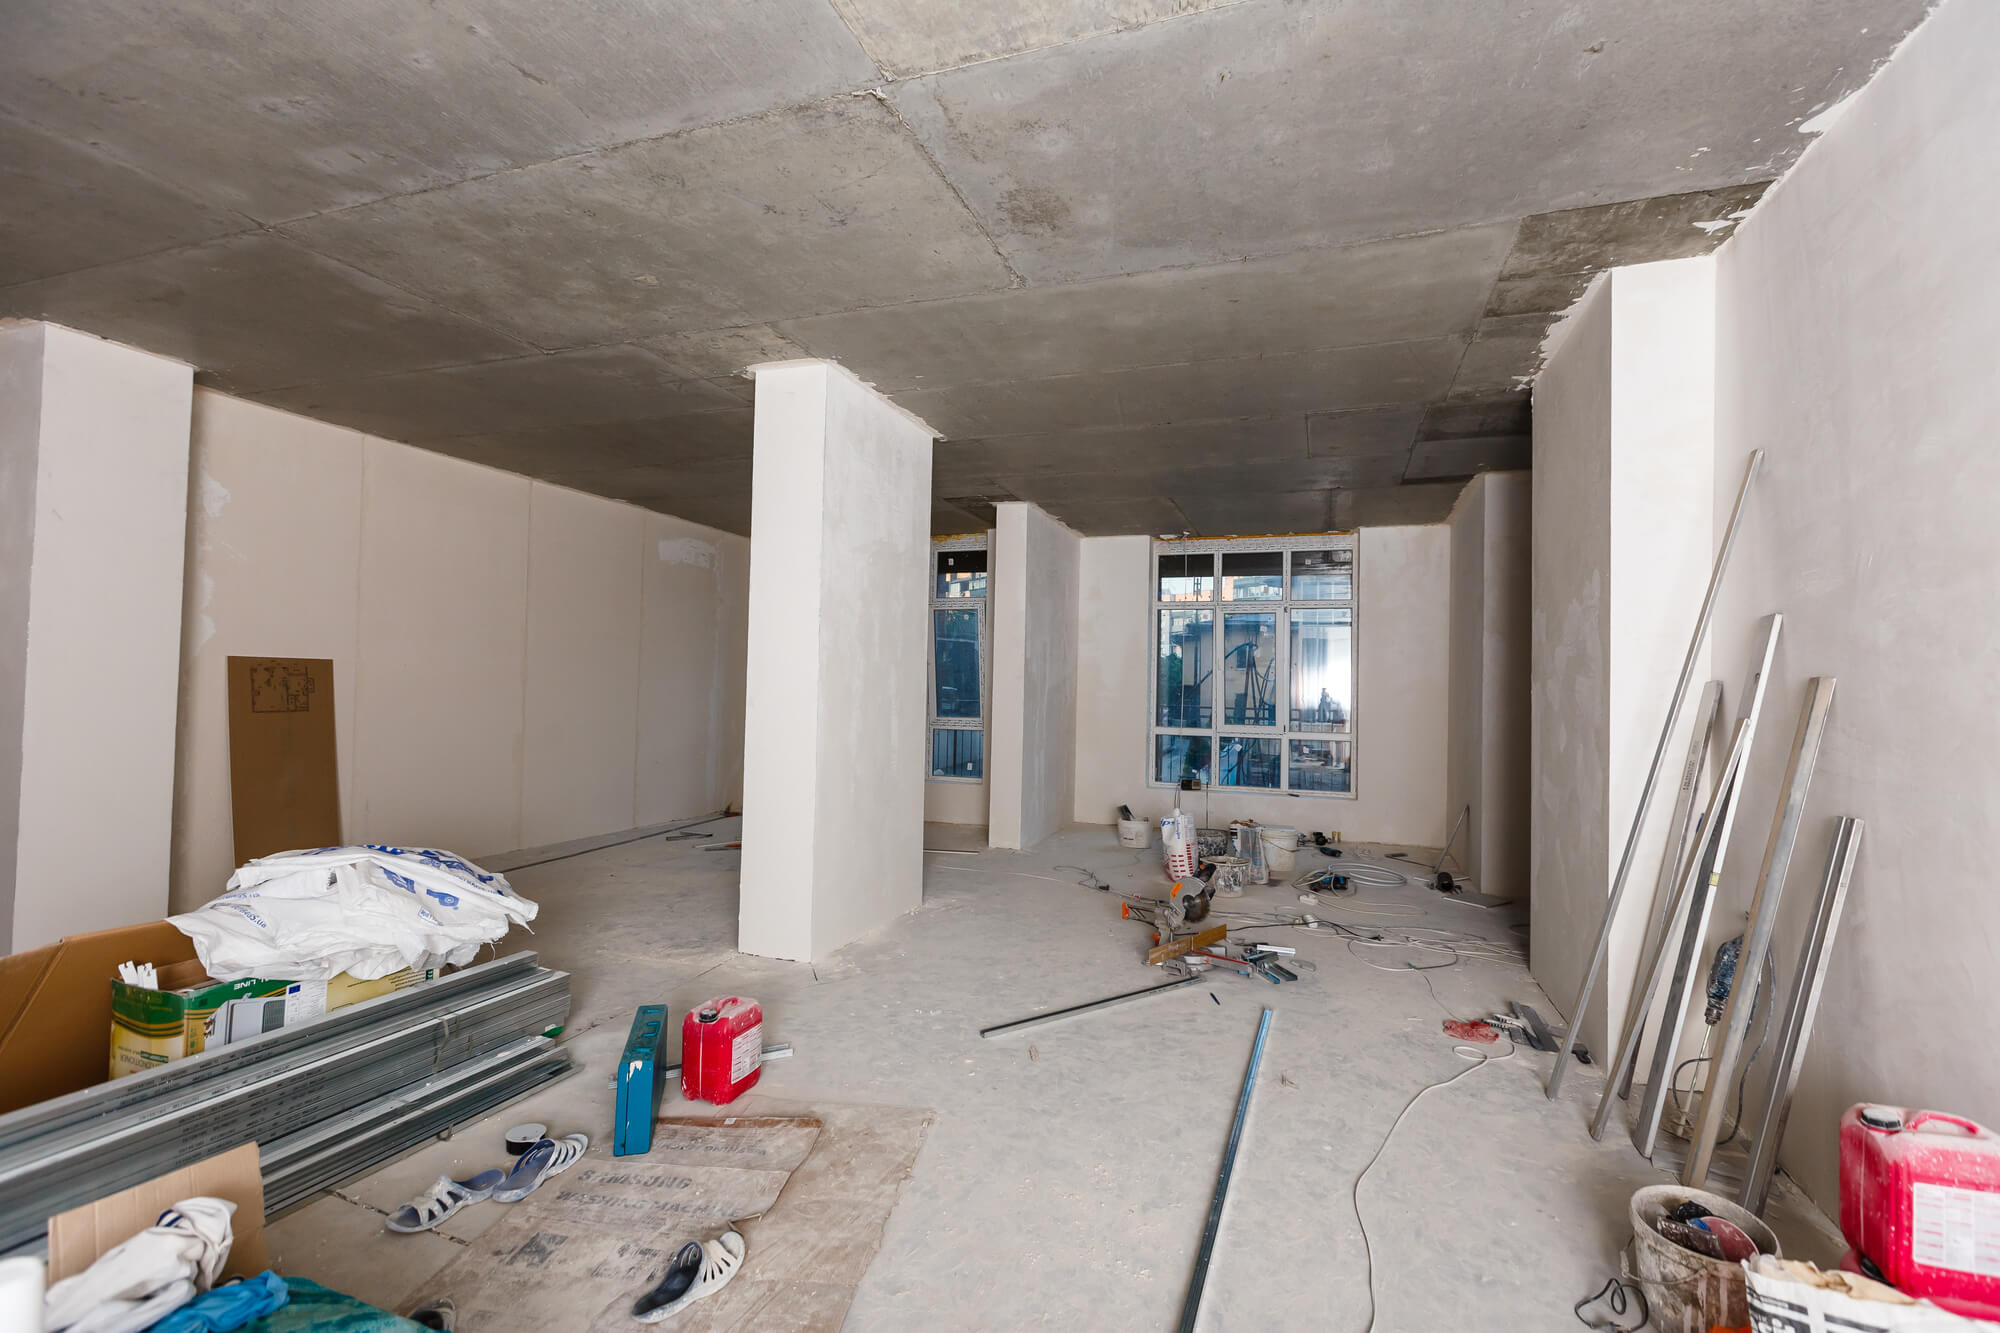 Room of a multifamily facility during restoration process